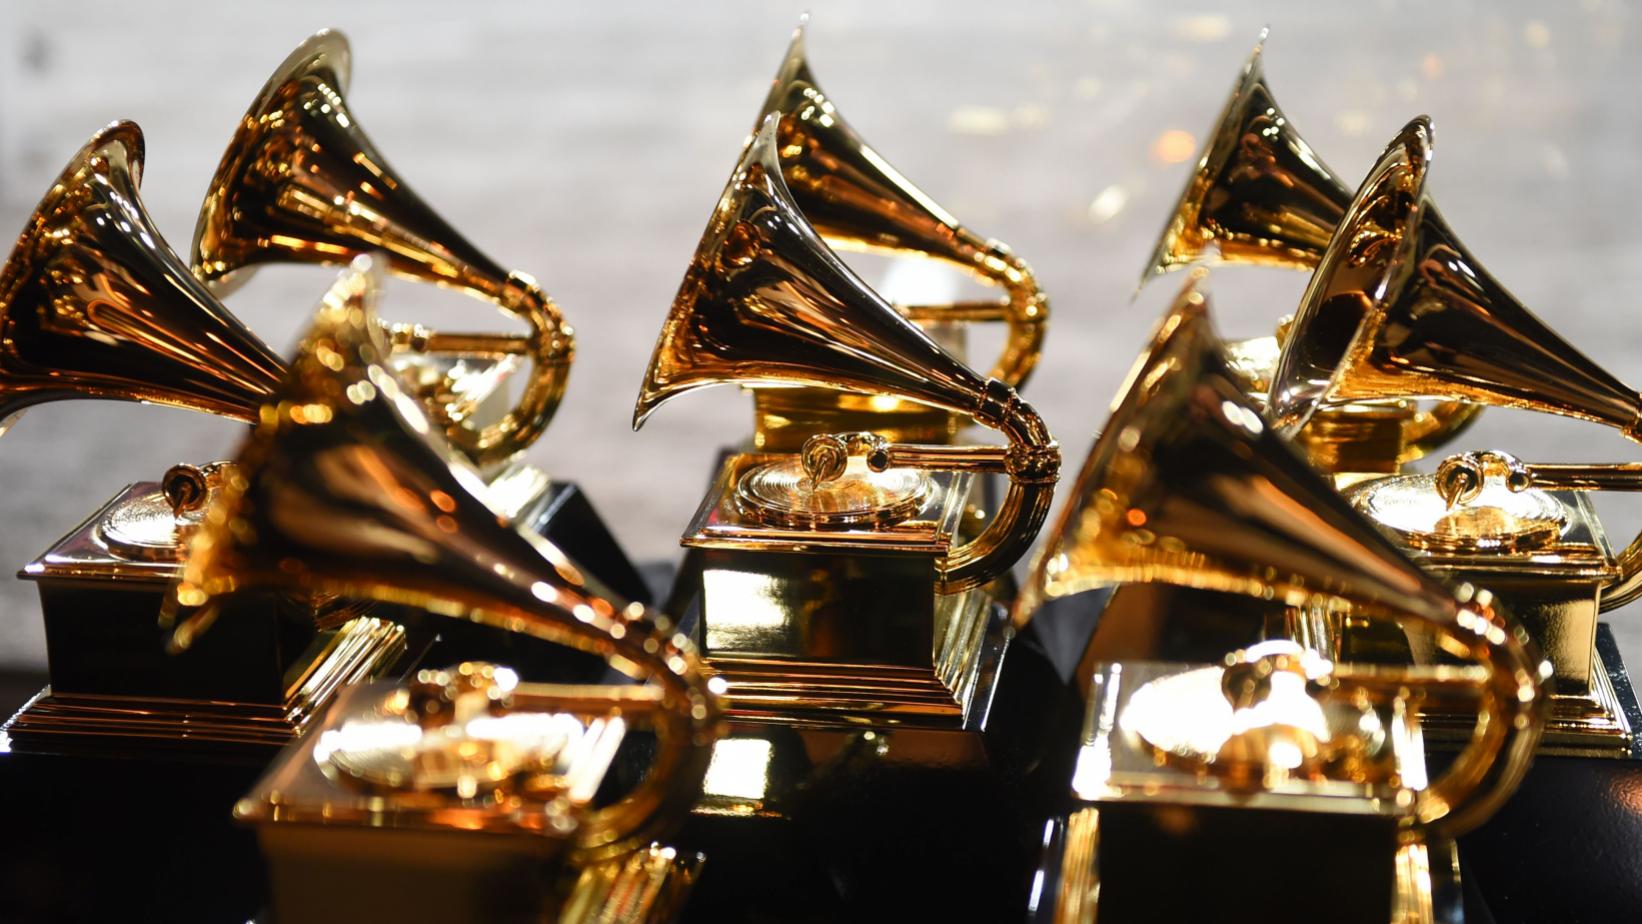 2022 GRAMMY AWARDS POSTPONED DUE TO COVID-19